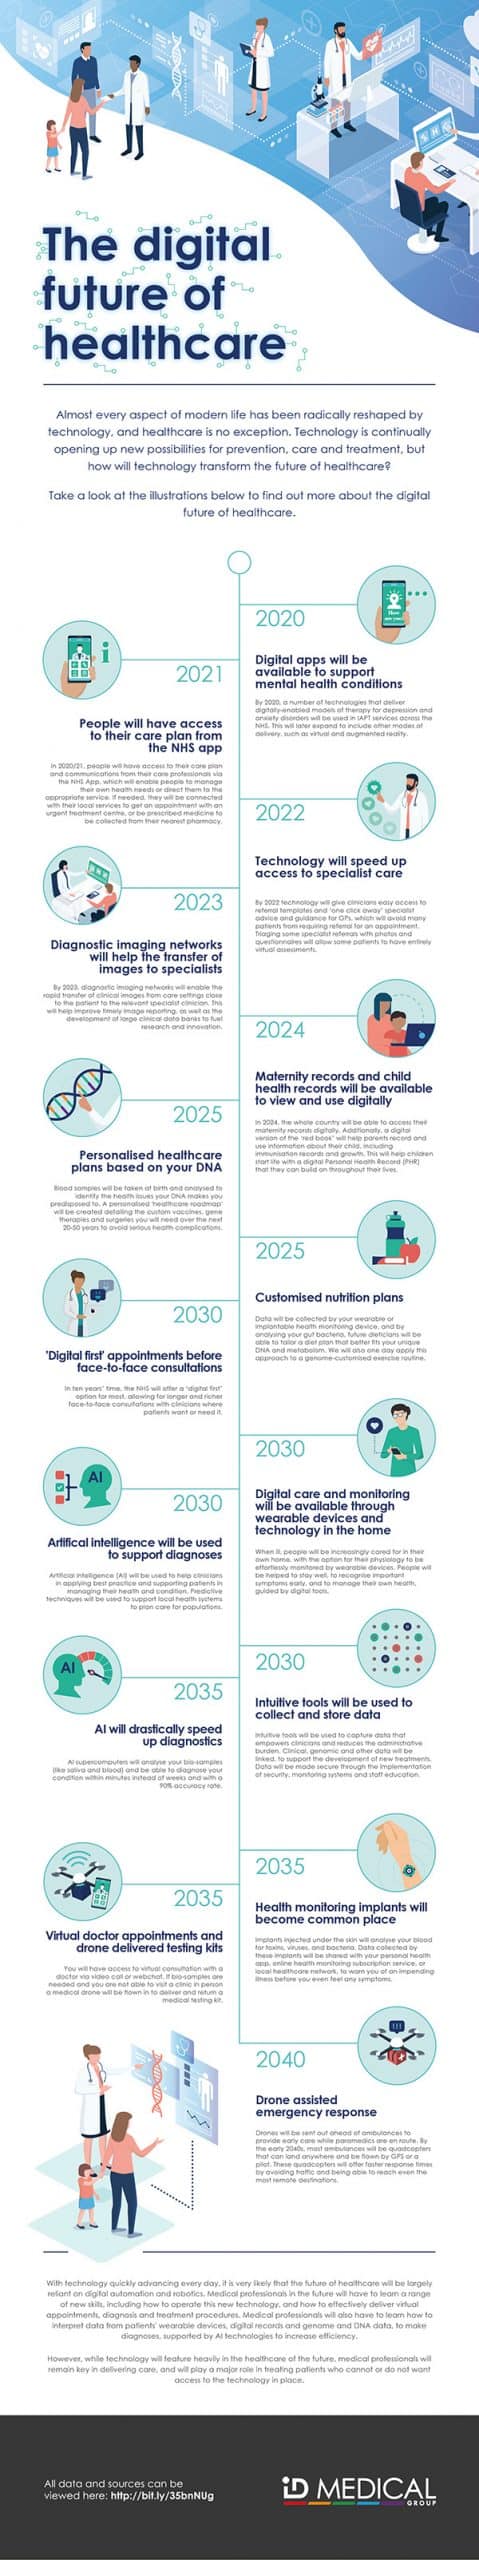 ID Medical the digital future of healthcare infographic